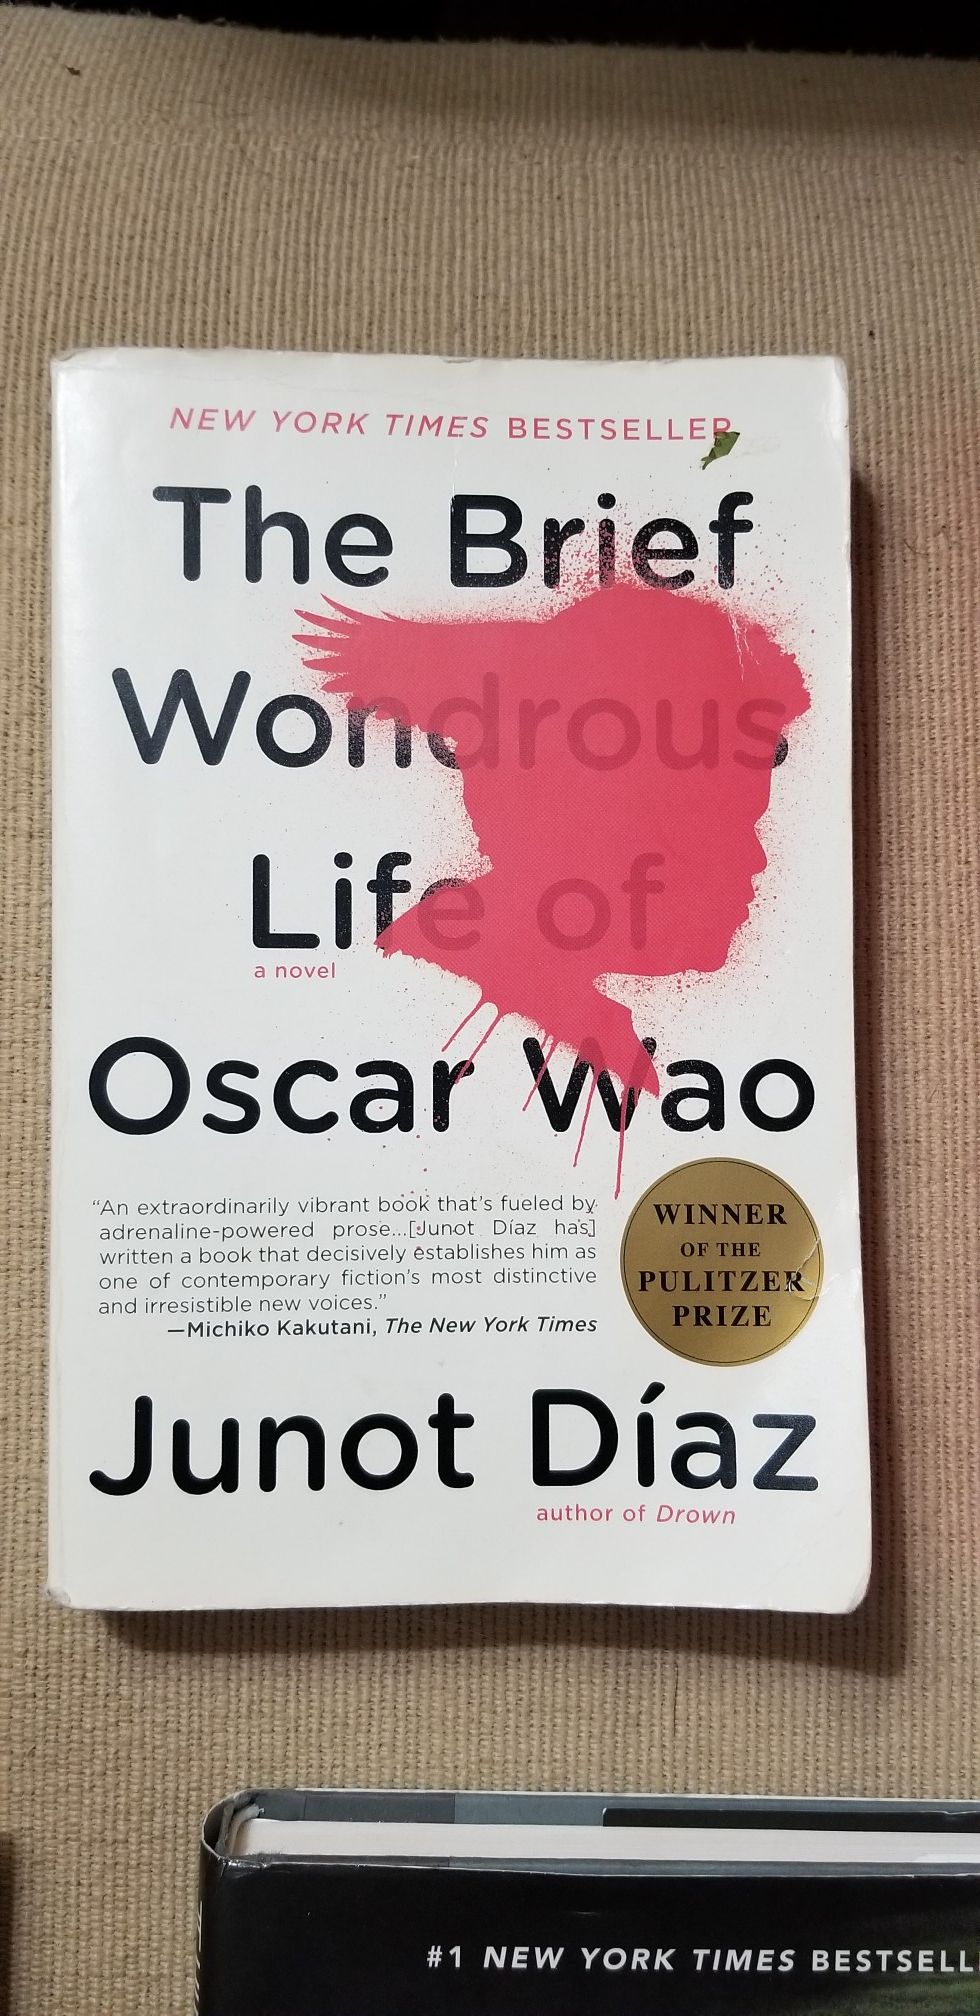 The Brief Wonderous Life of Oscar Wao by Junot Diaz paperback